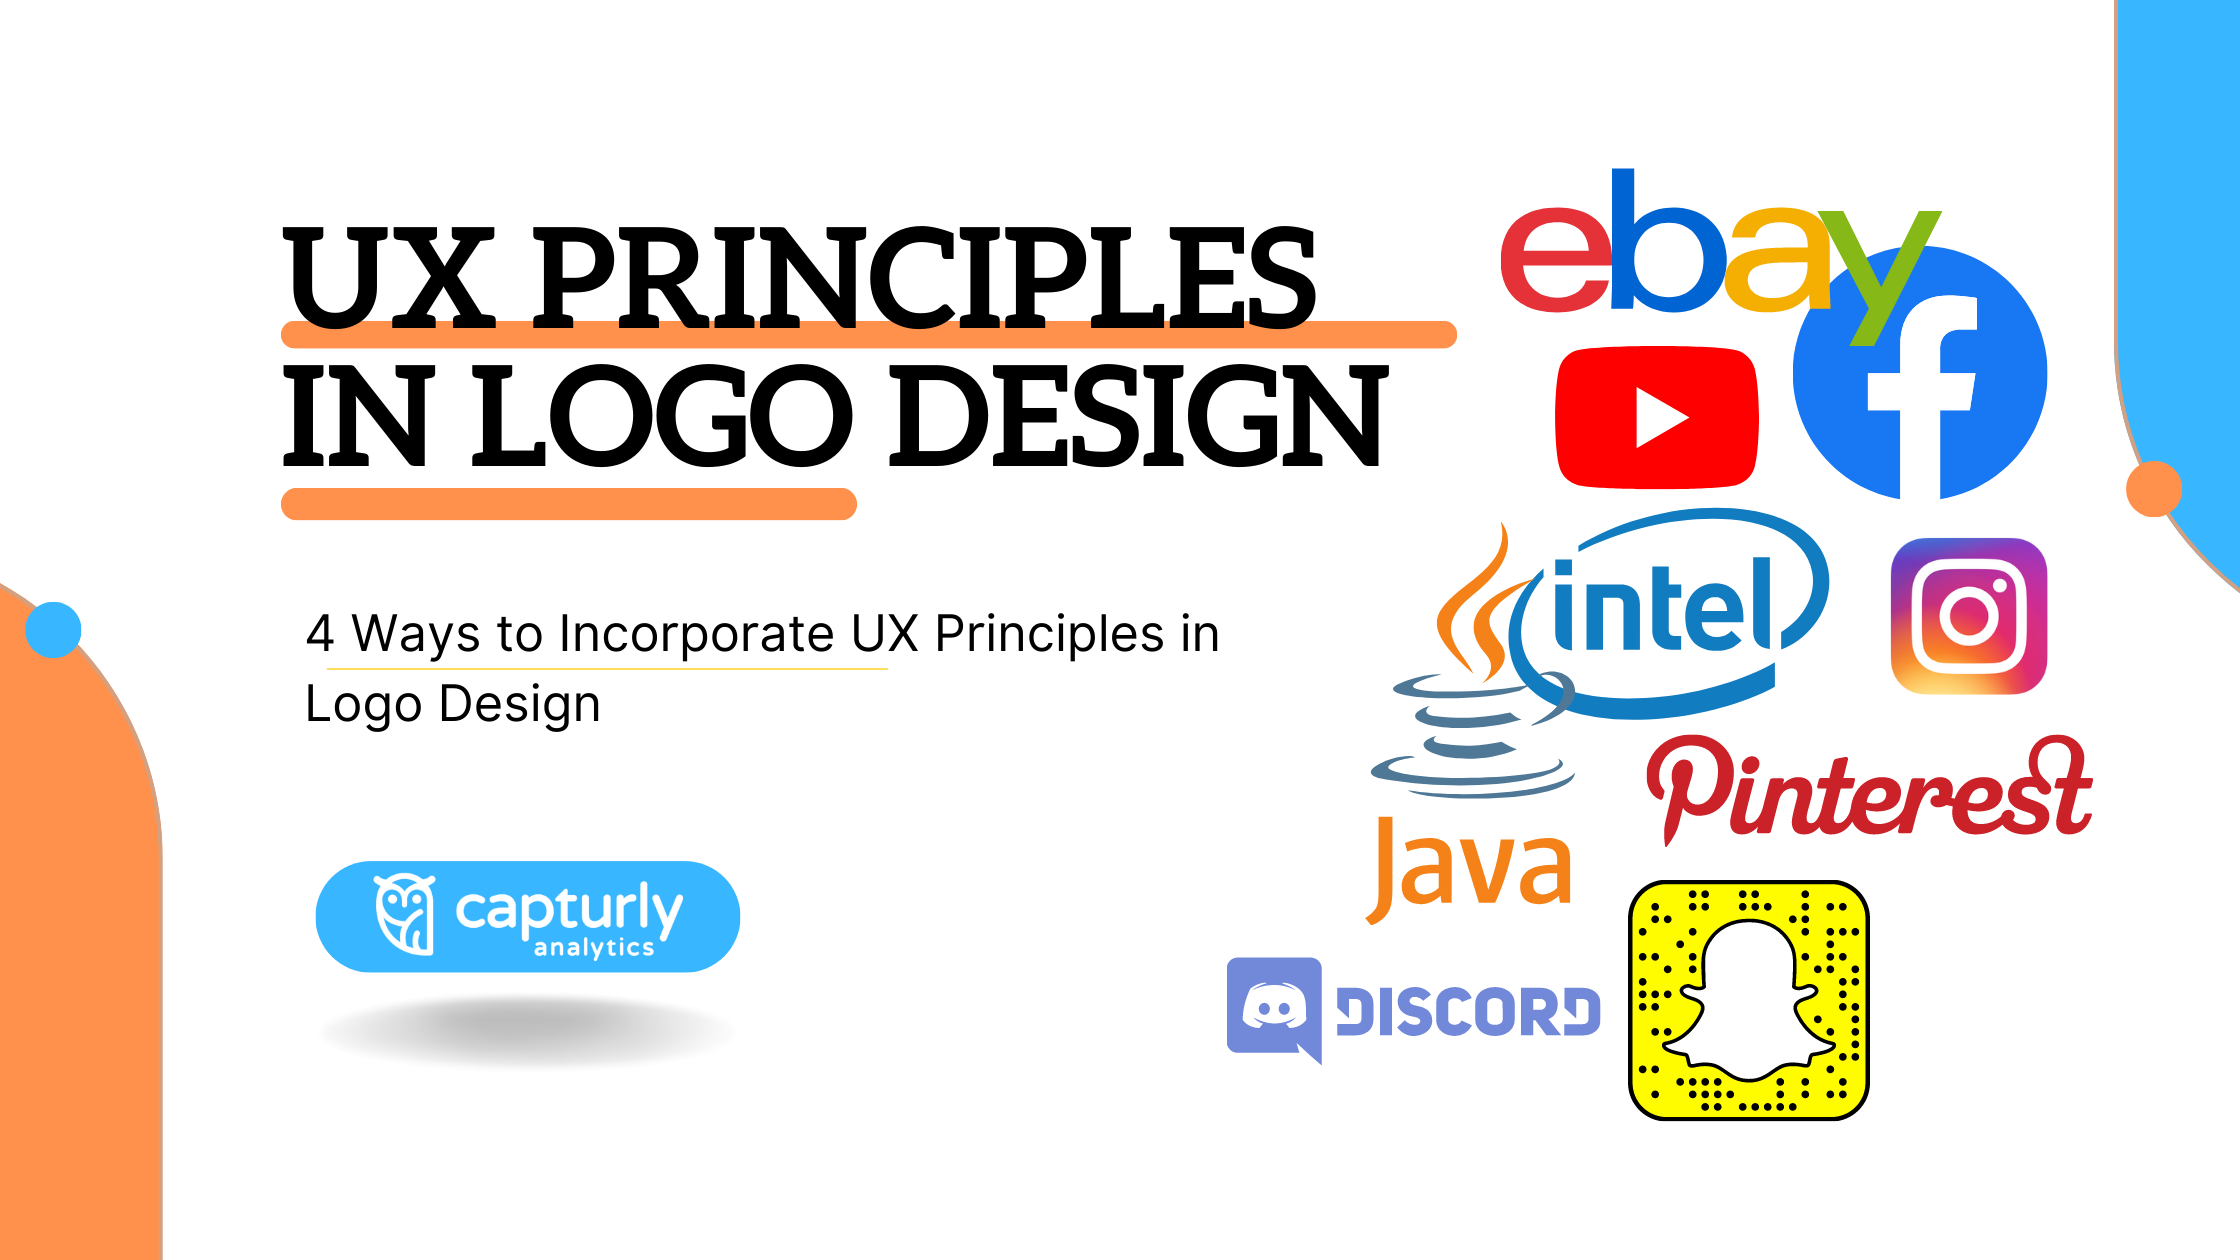 The title: 4 Ways to Incorporate UX Principles in Logo Design. Logos on the right side.